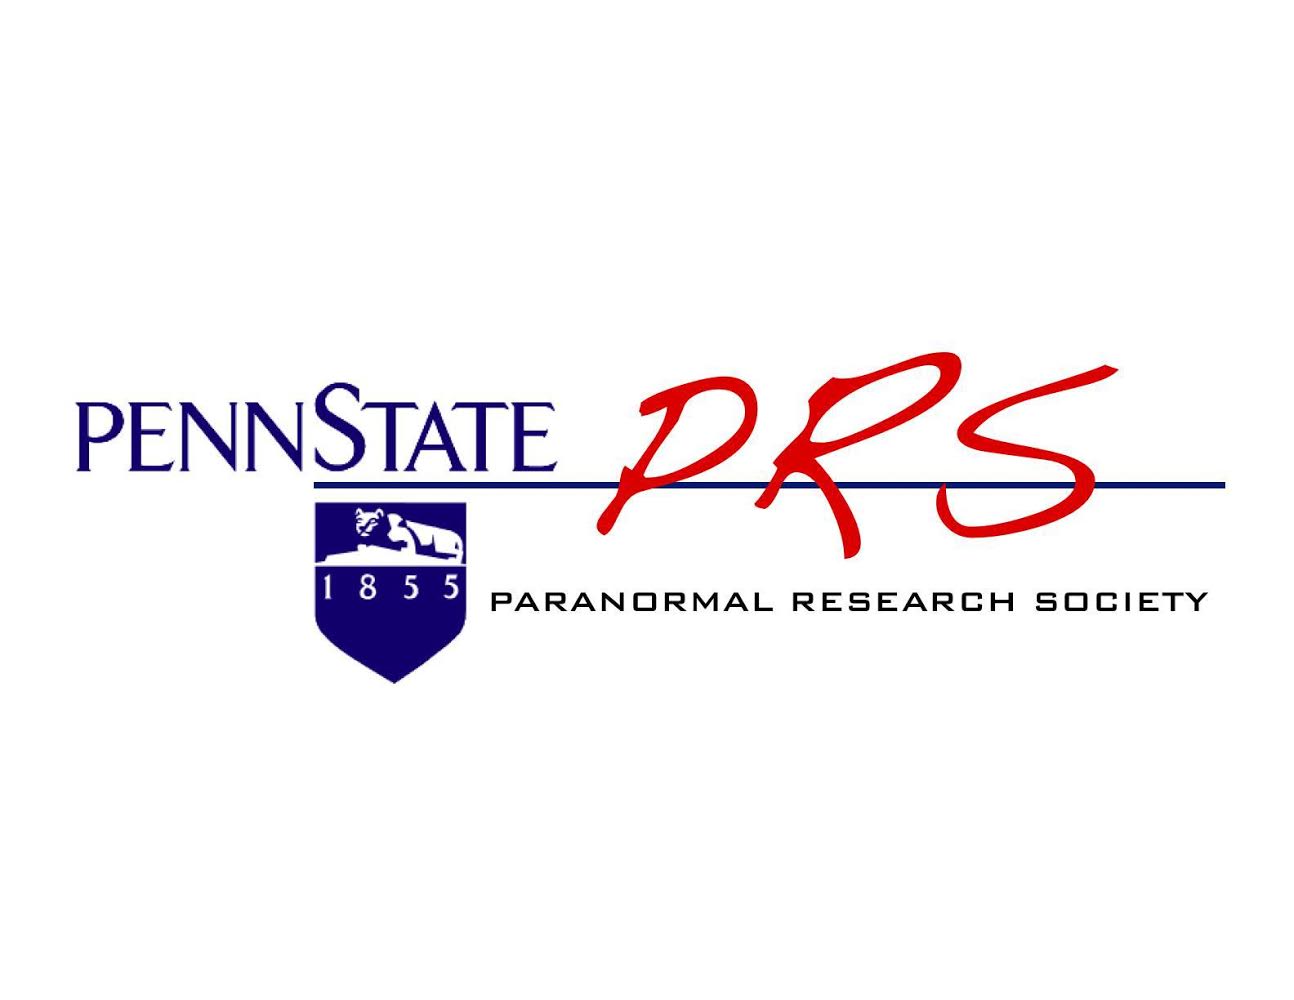 Who You Gonna Call? … The Paranormal Research Society!